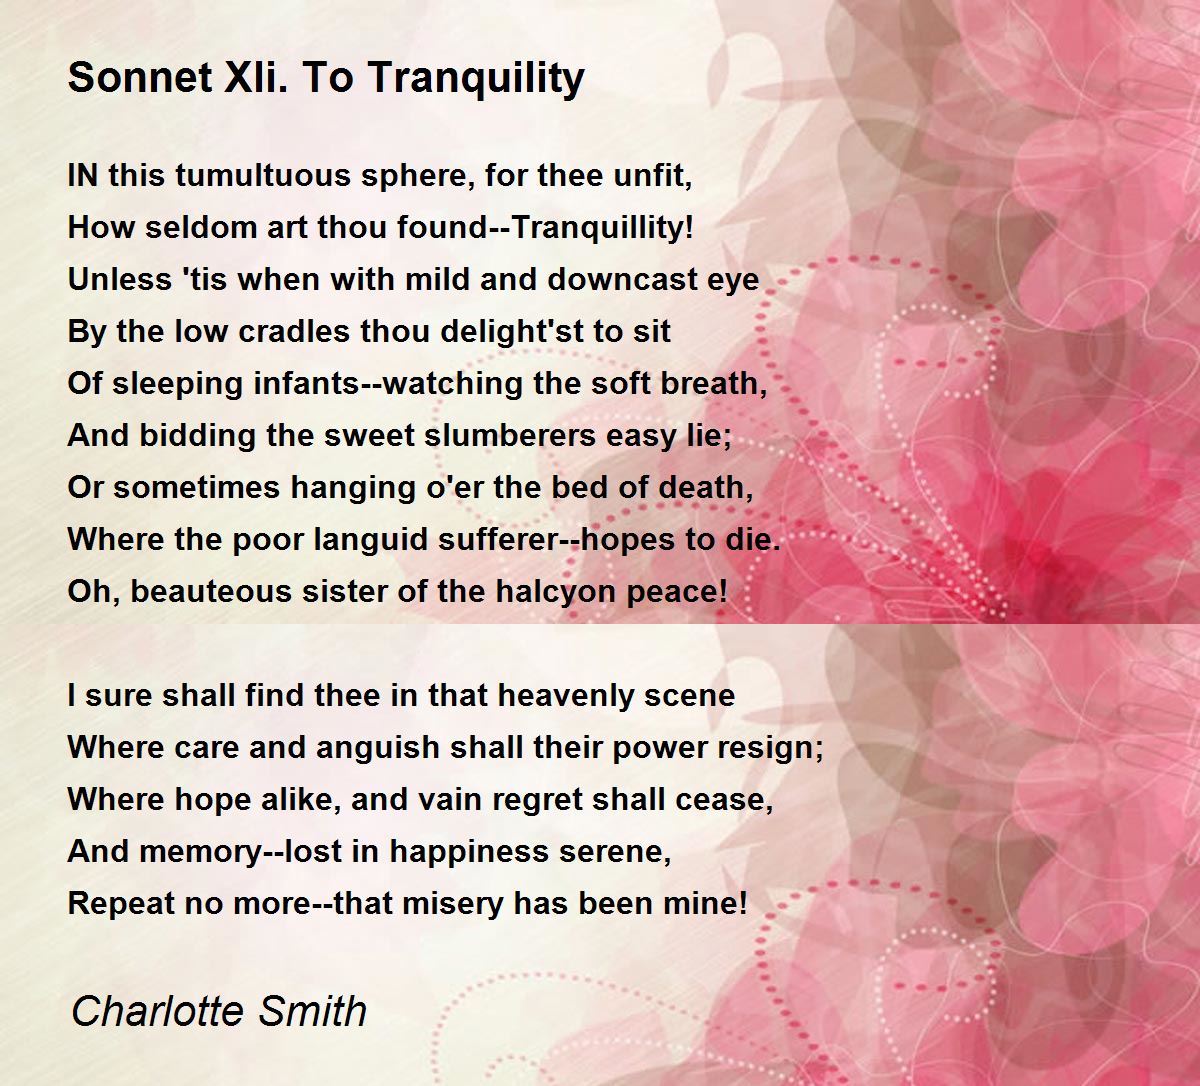 Sonnet Xli. To Tranquility Poem by Charlotte Smith - Poem 